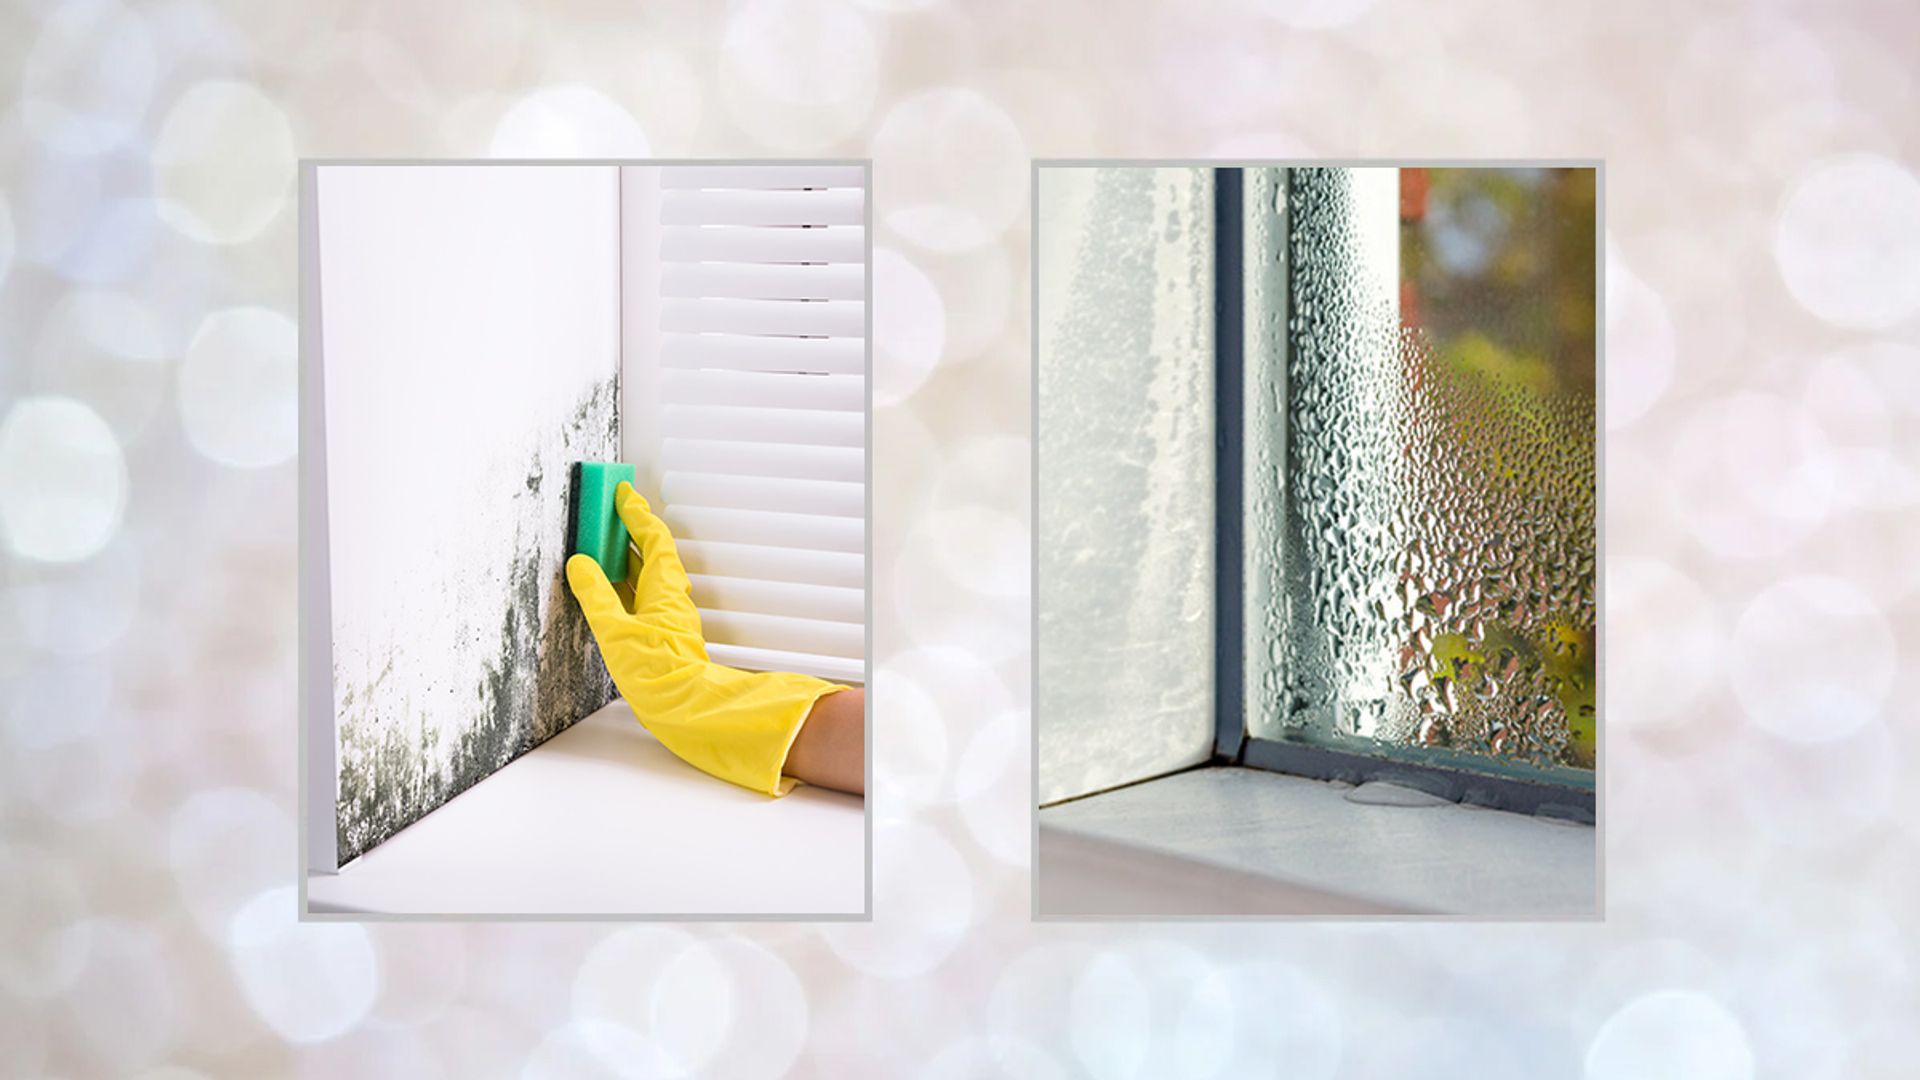 Five unusual hacks to get rid of mould and condensation on your